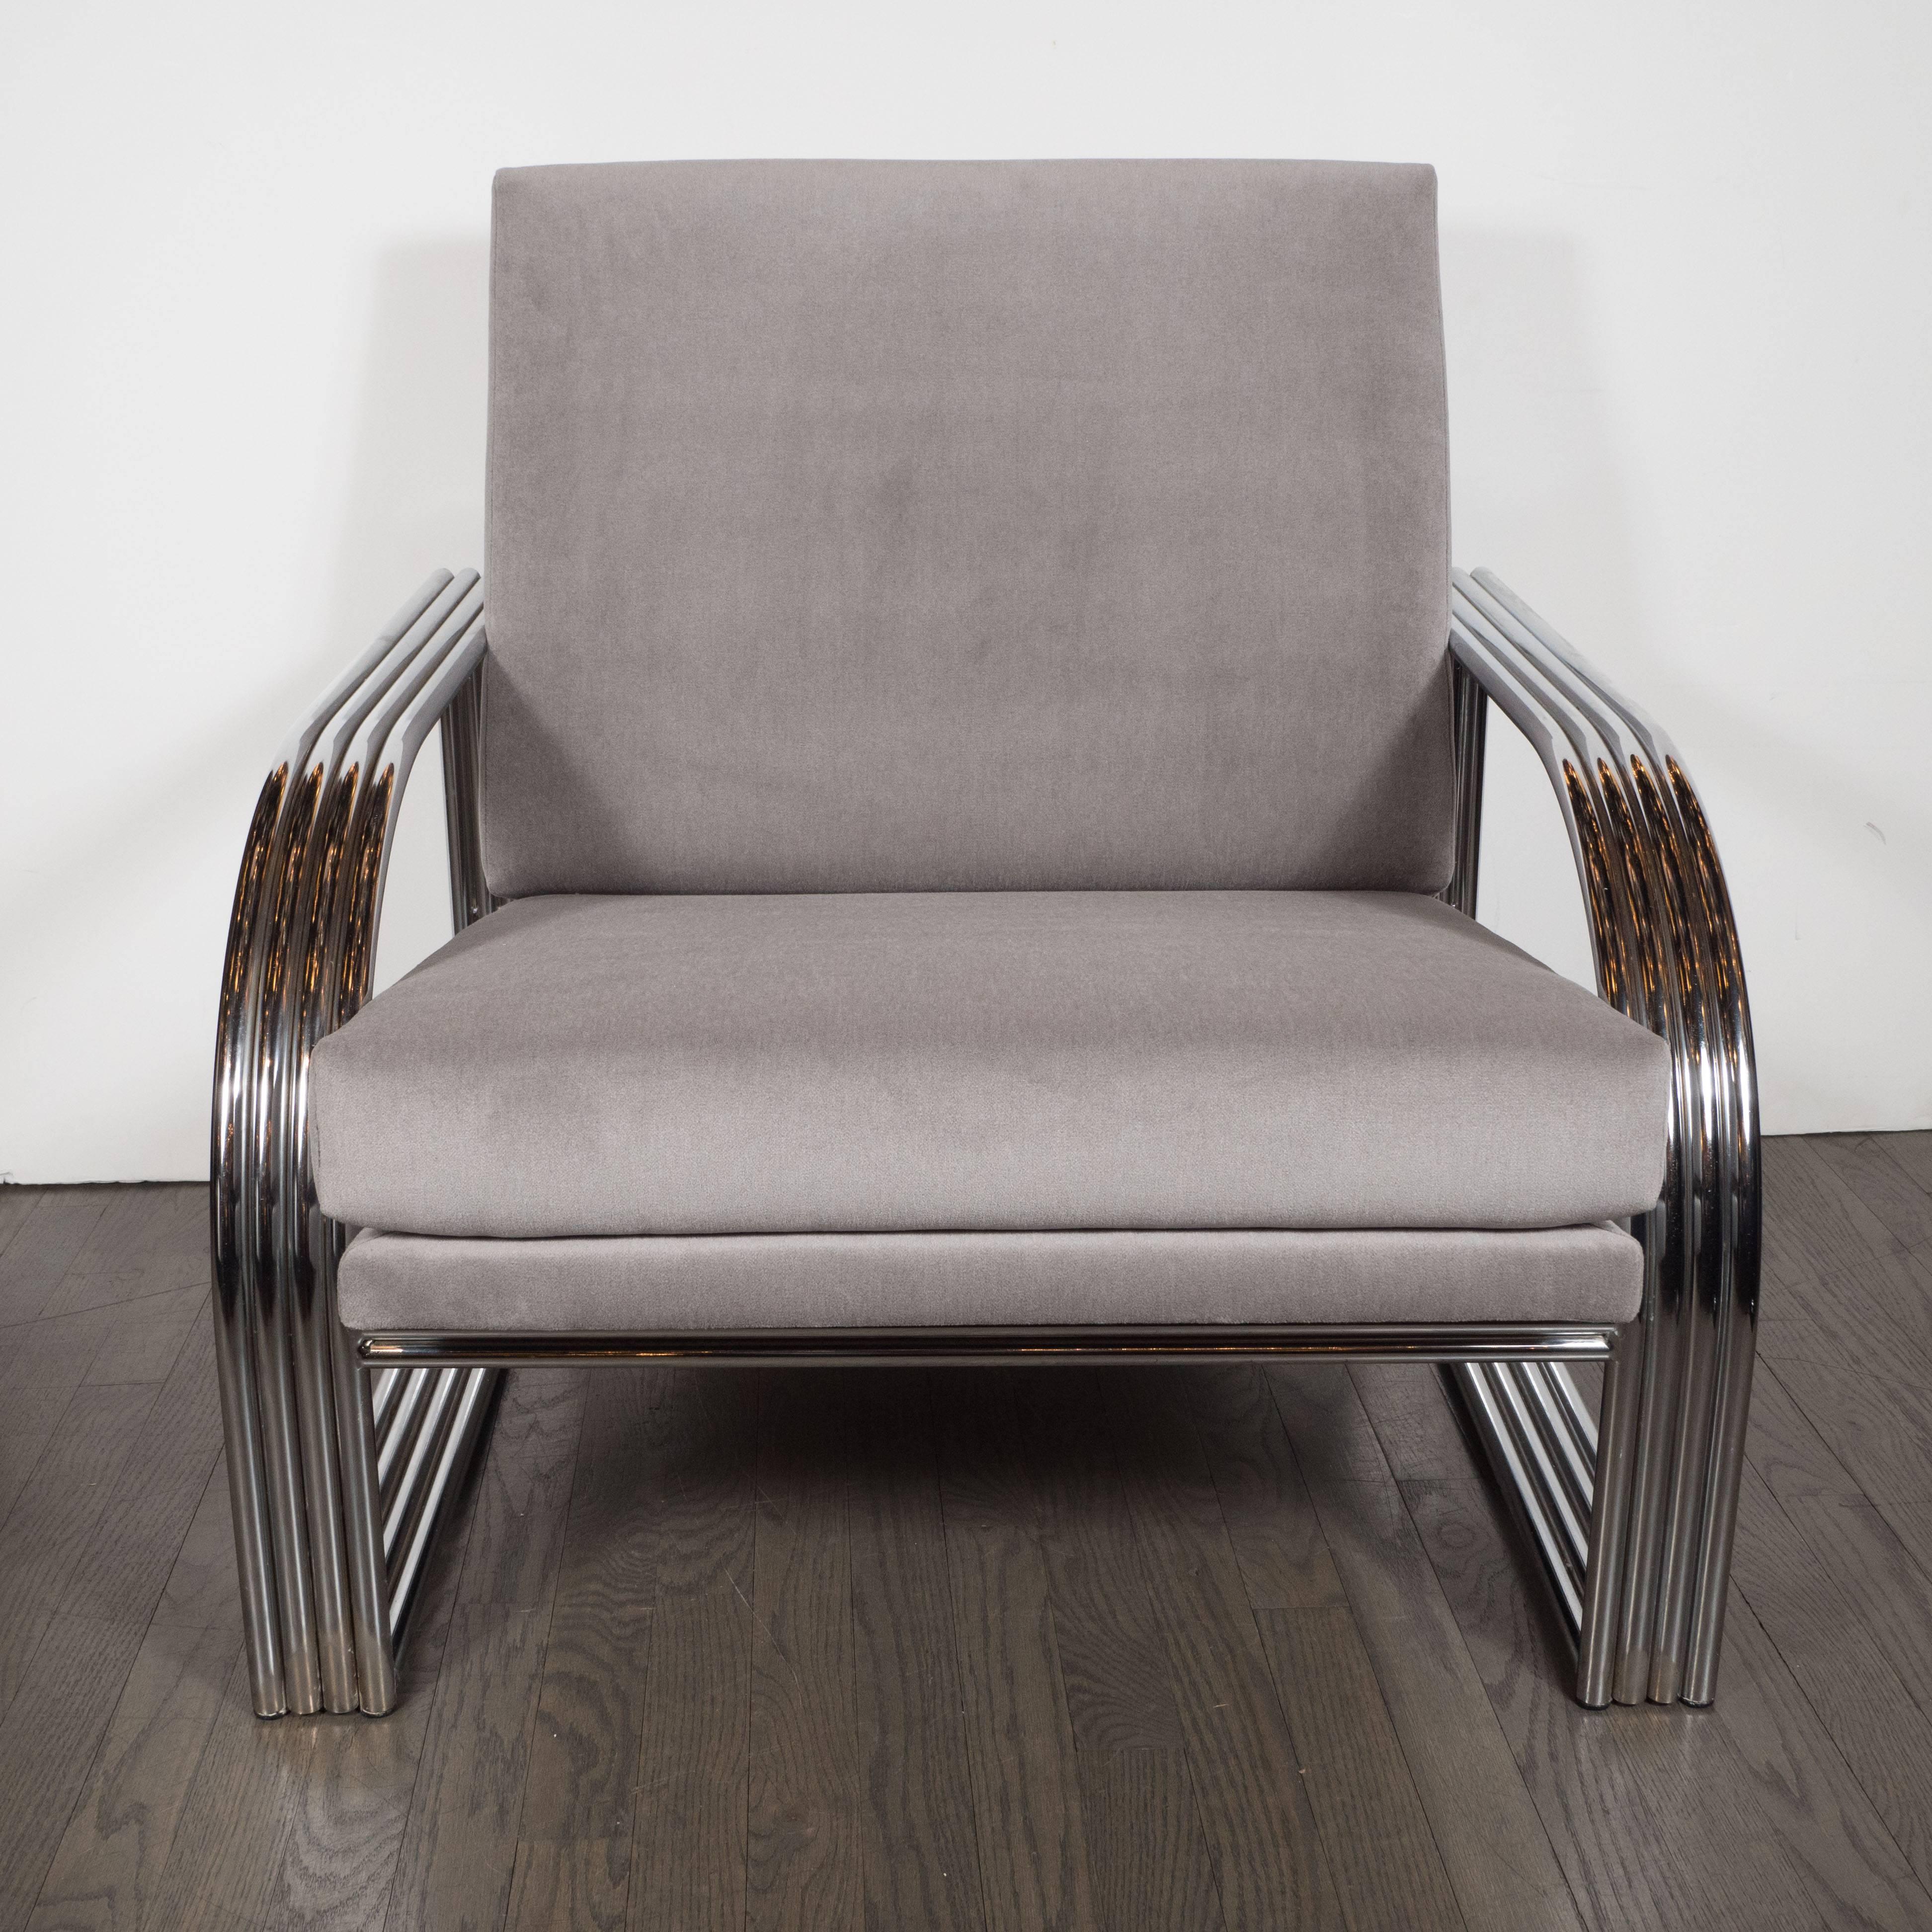 This dramatic and graphic Art Deco inspired club chair was designed in the manner of Jay Spectre, circa 1980. This chair features banded streamlined arms, consisting of four bent chrome bars welded together that elegant curve on the sides. The arms